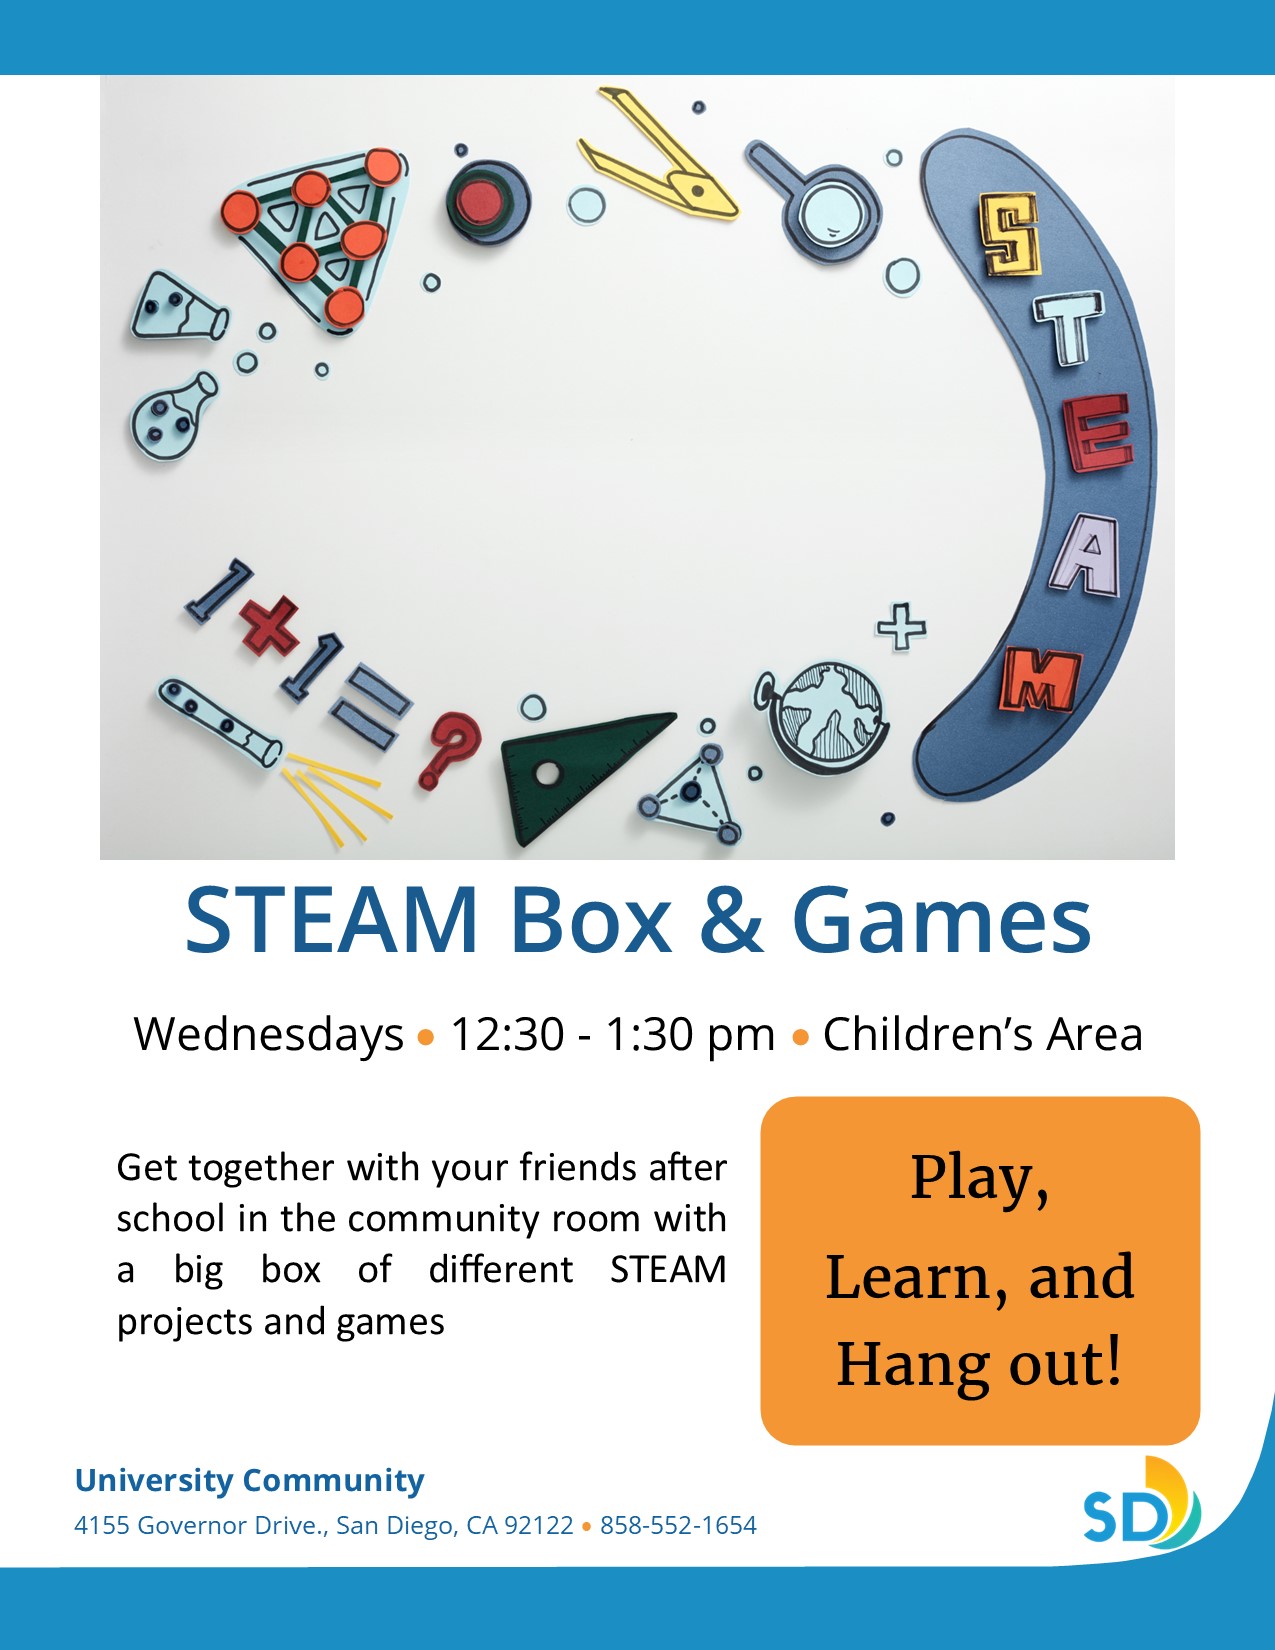 Flyer for the "Steam Box and Games" weekly program at the University Community Library